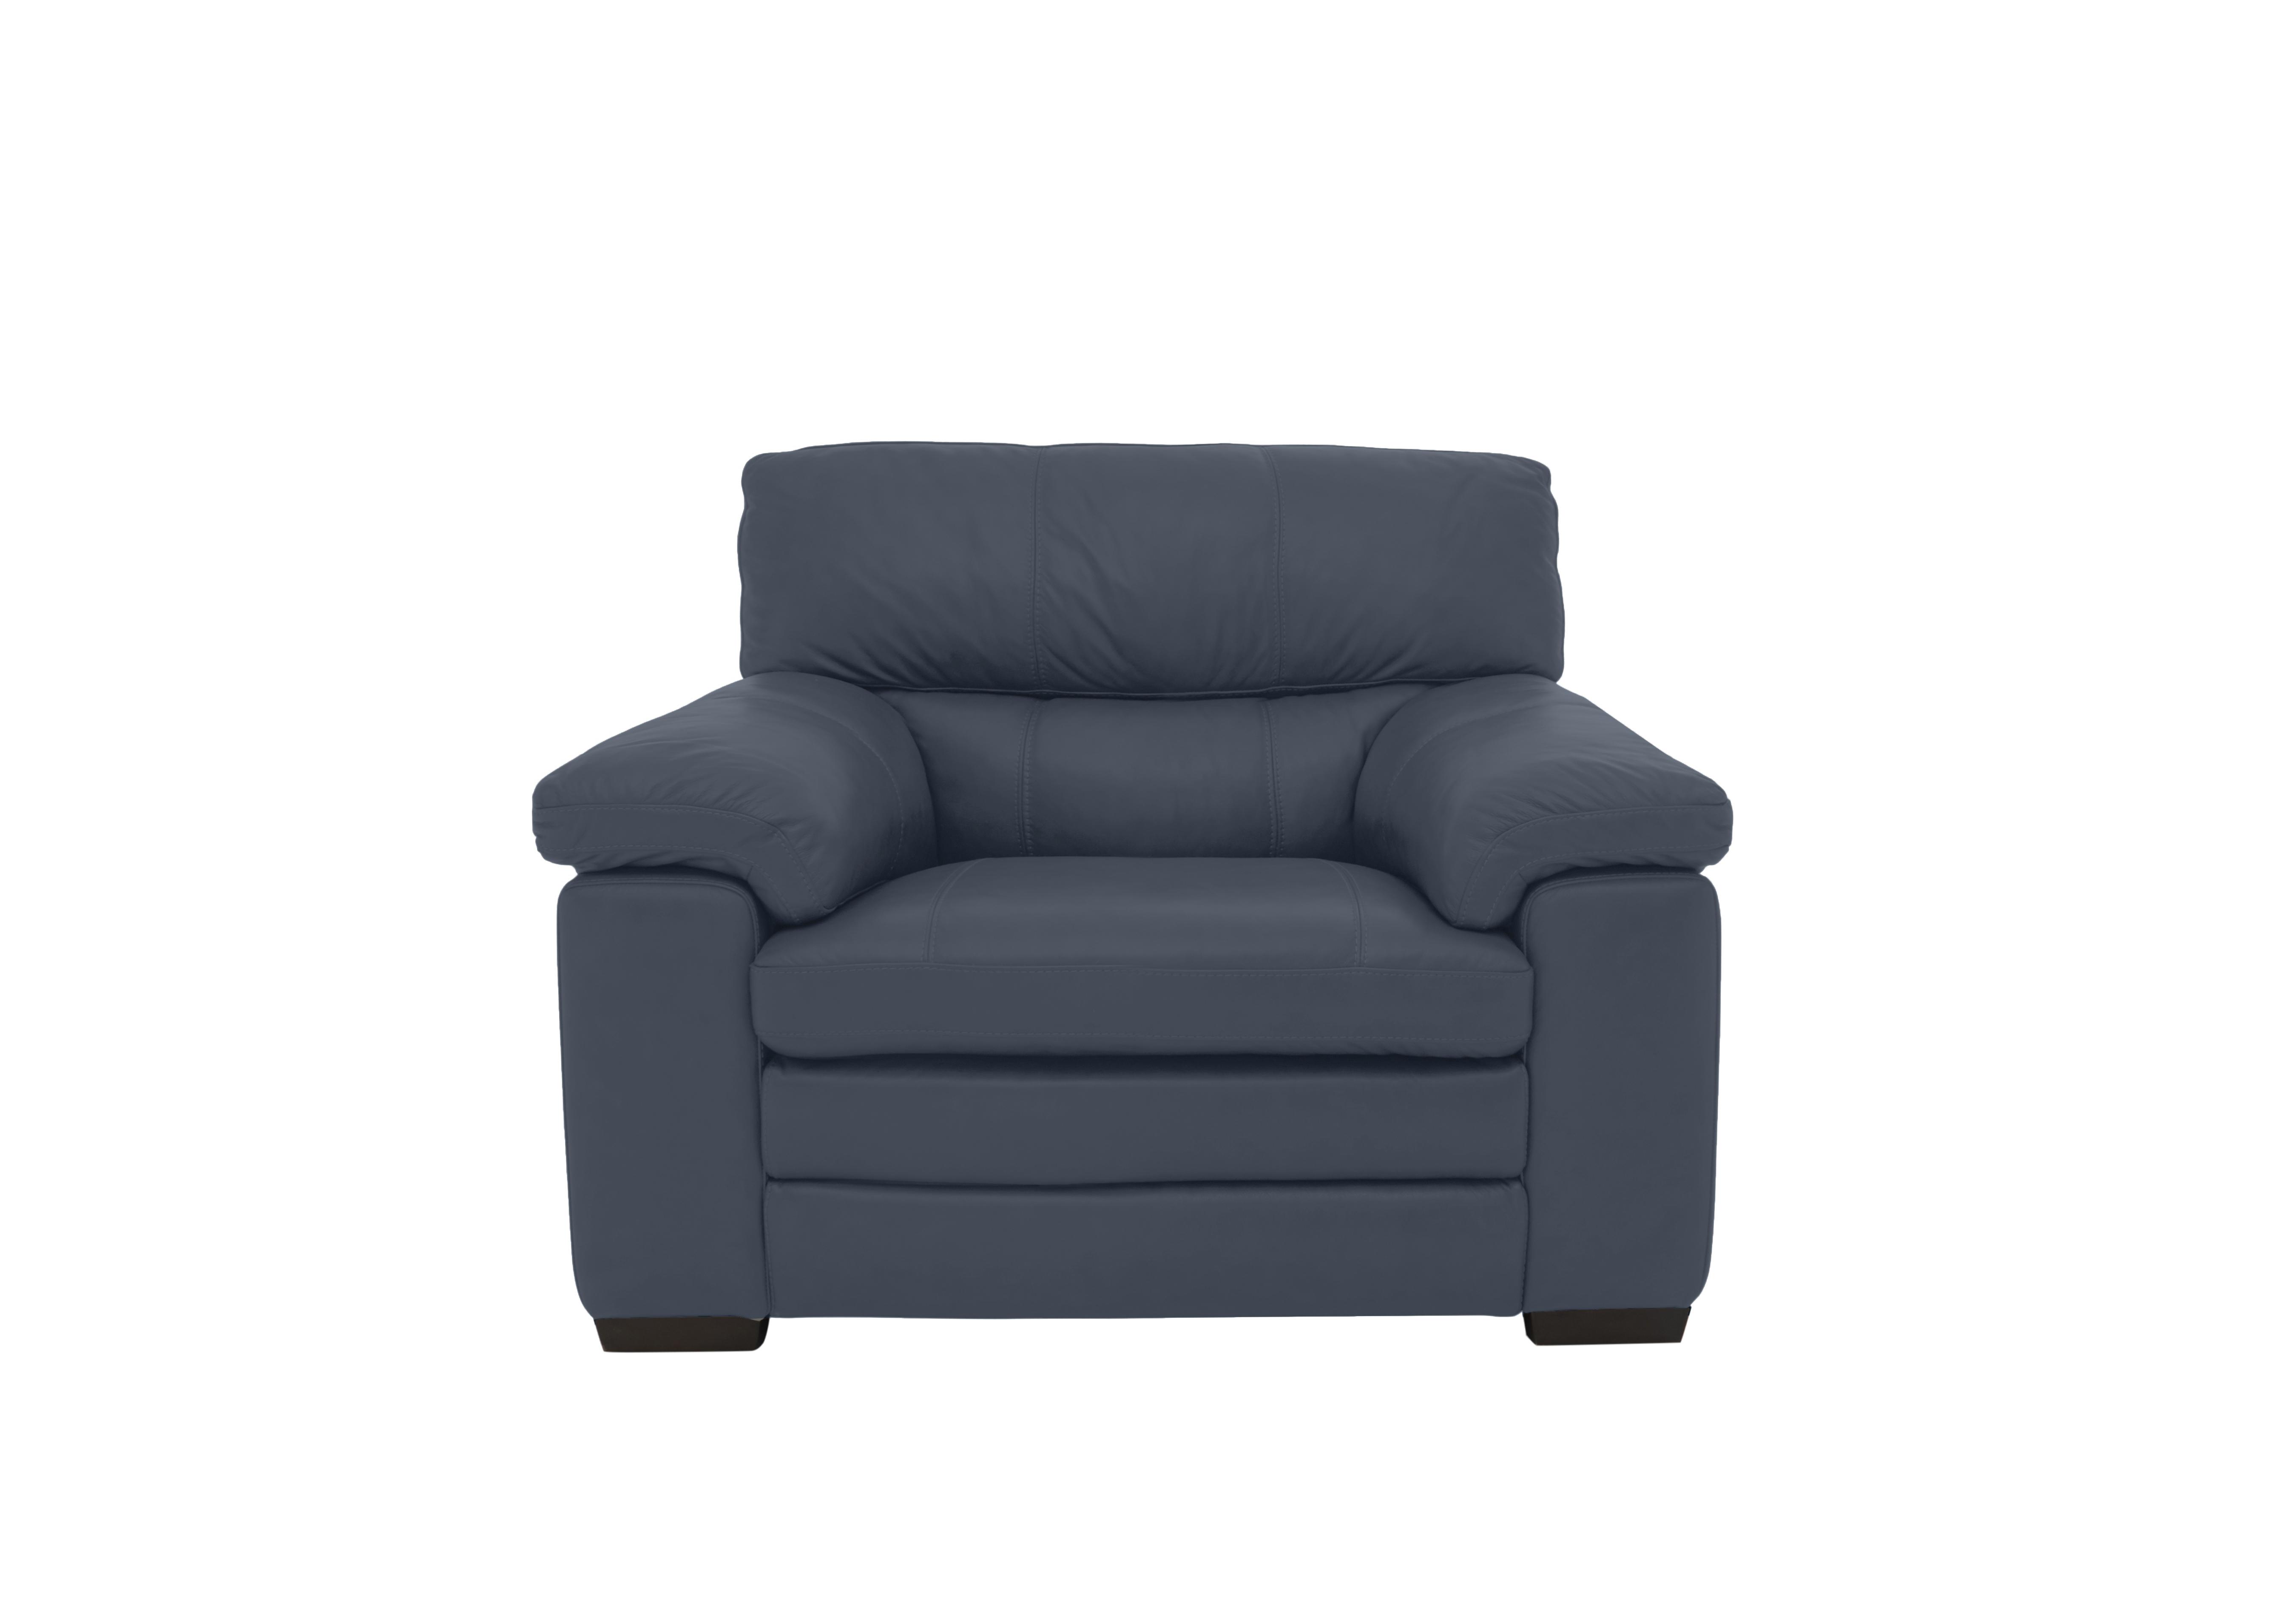 Cozee Leather Armchair in Bv-313e Ocean Blue on Furniture Village